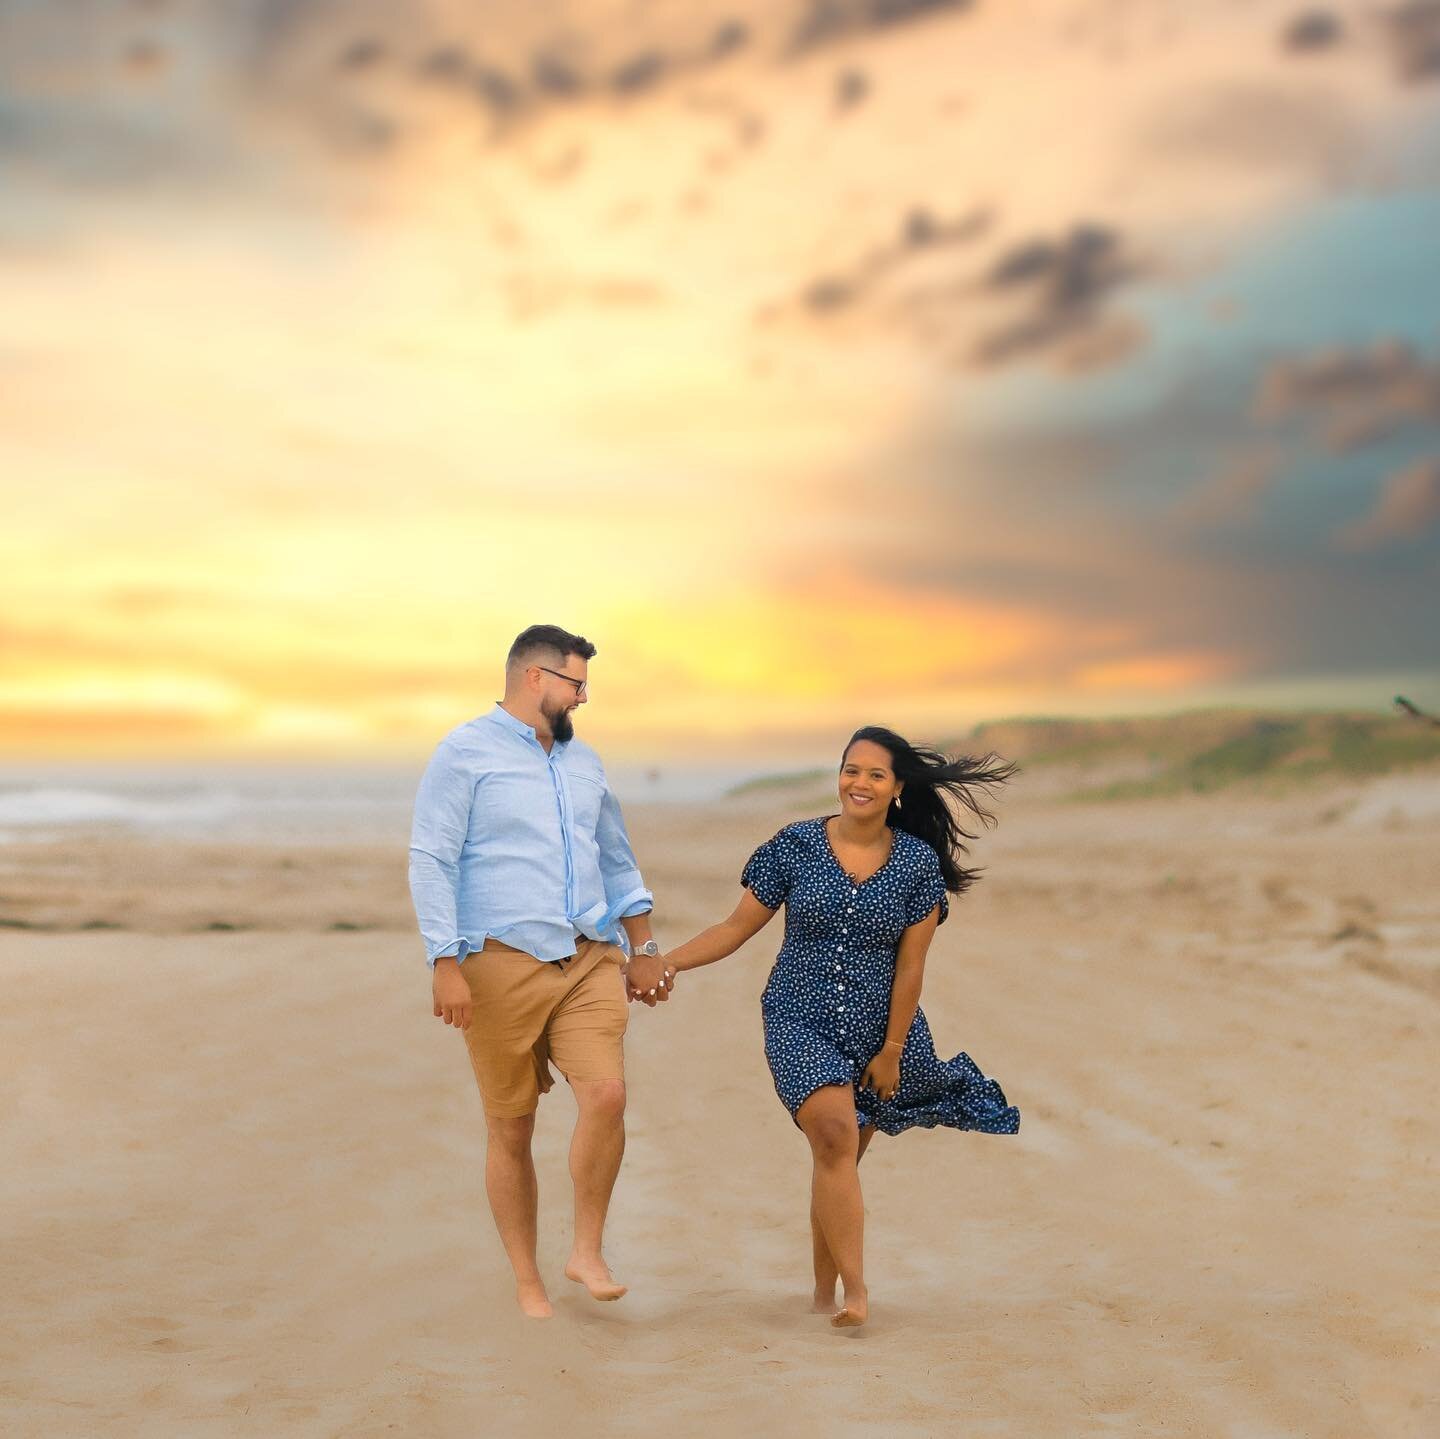 Nothing soothes my soul like a day by the ocean with you 💍 Luis &amp; Jacqueline | Engaged 🫶🏽
.
.
.
.
.
.
.
.

#NorfolkWeddingPhotographer#VirginiaBeachWeddingPhotographer#ChesapeakeWeddingPhotographer#PortsmouthWeddingPhotographer#SuffolkWeddingP